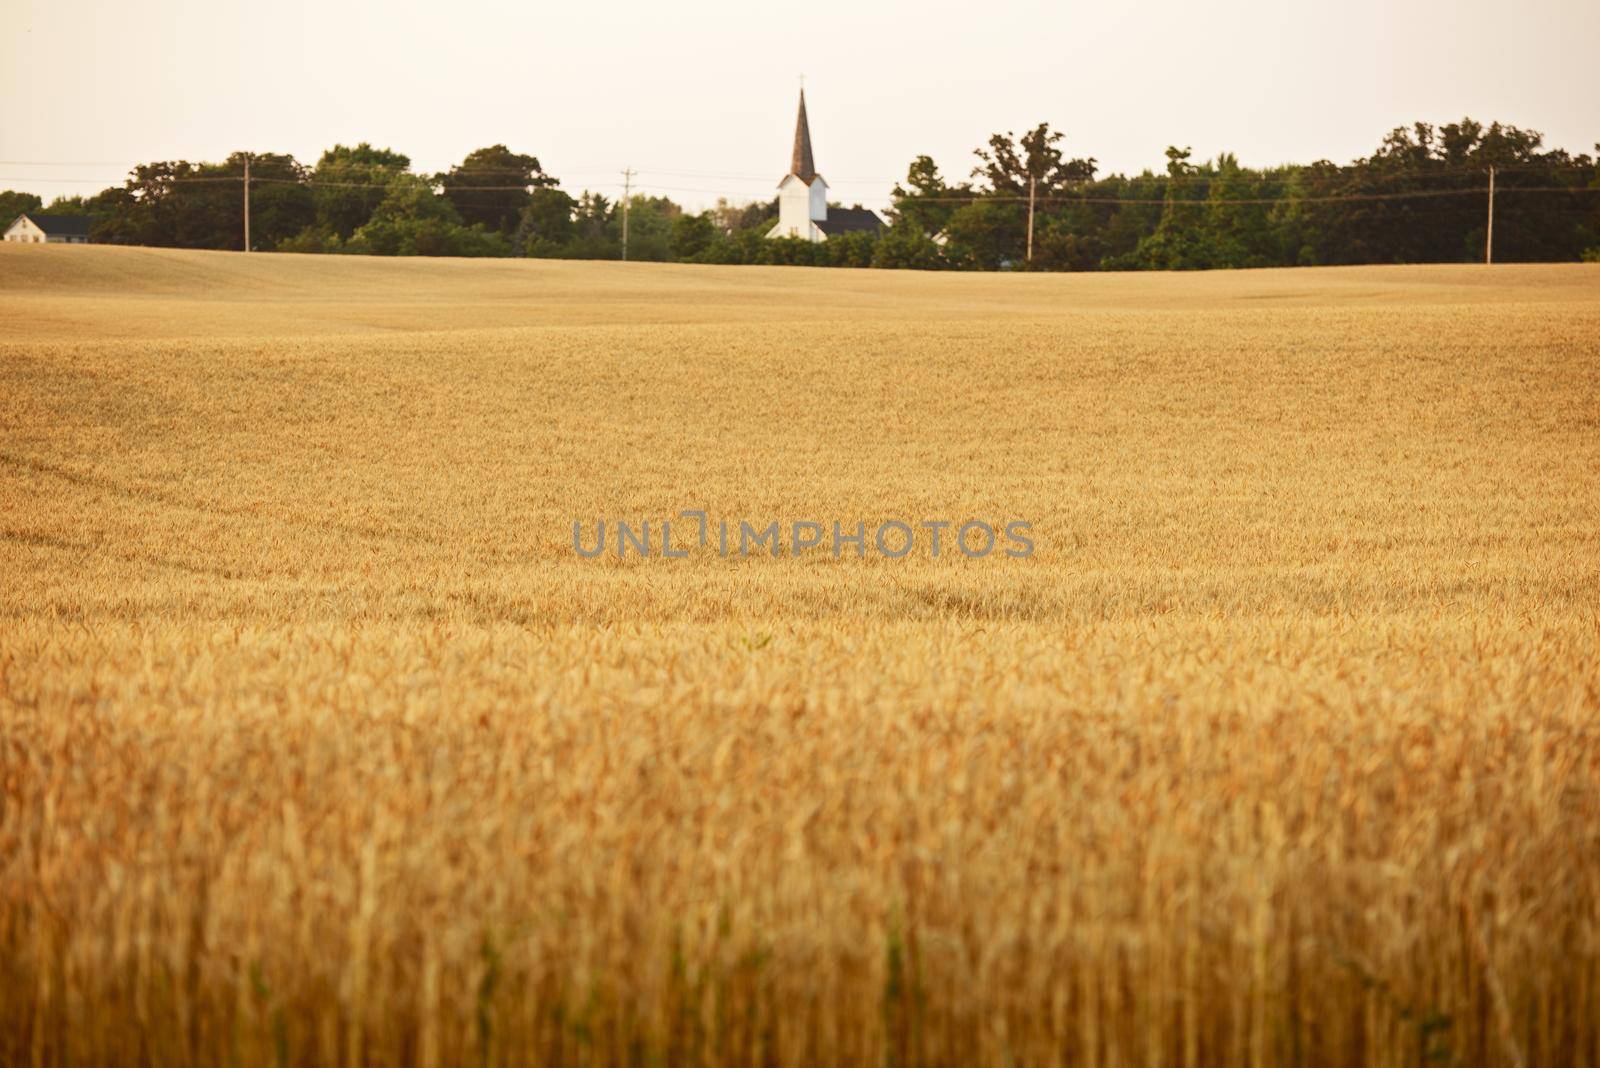 Wheat Field in Illinois State. Small Local Church in a Distance.  by welcomia